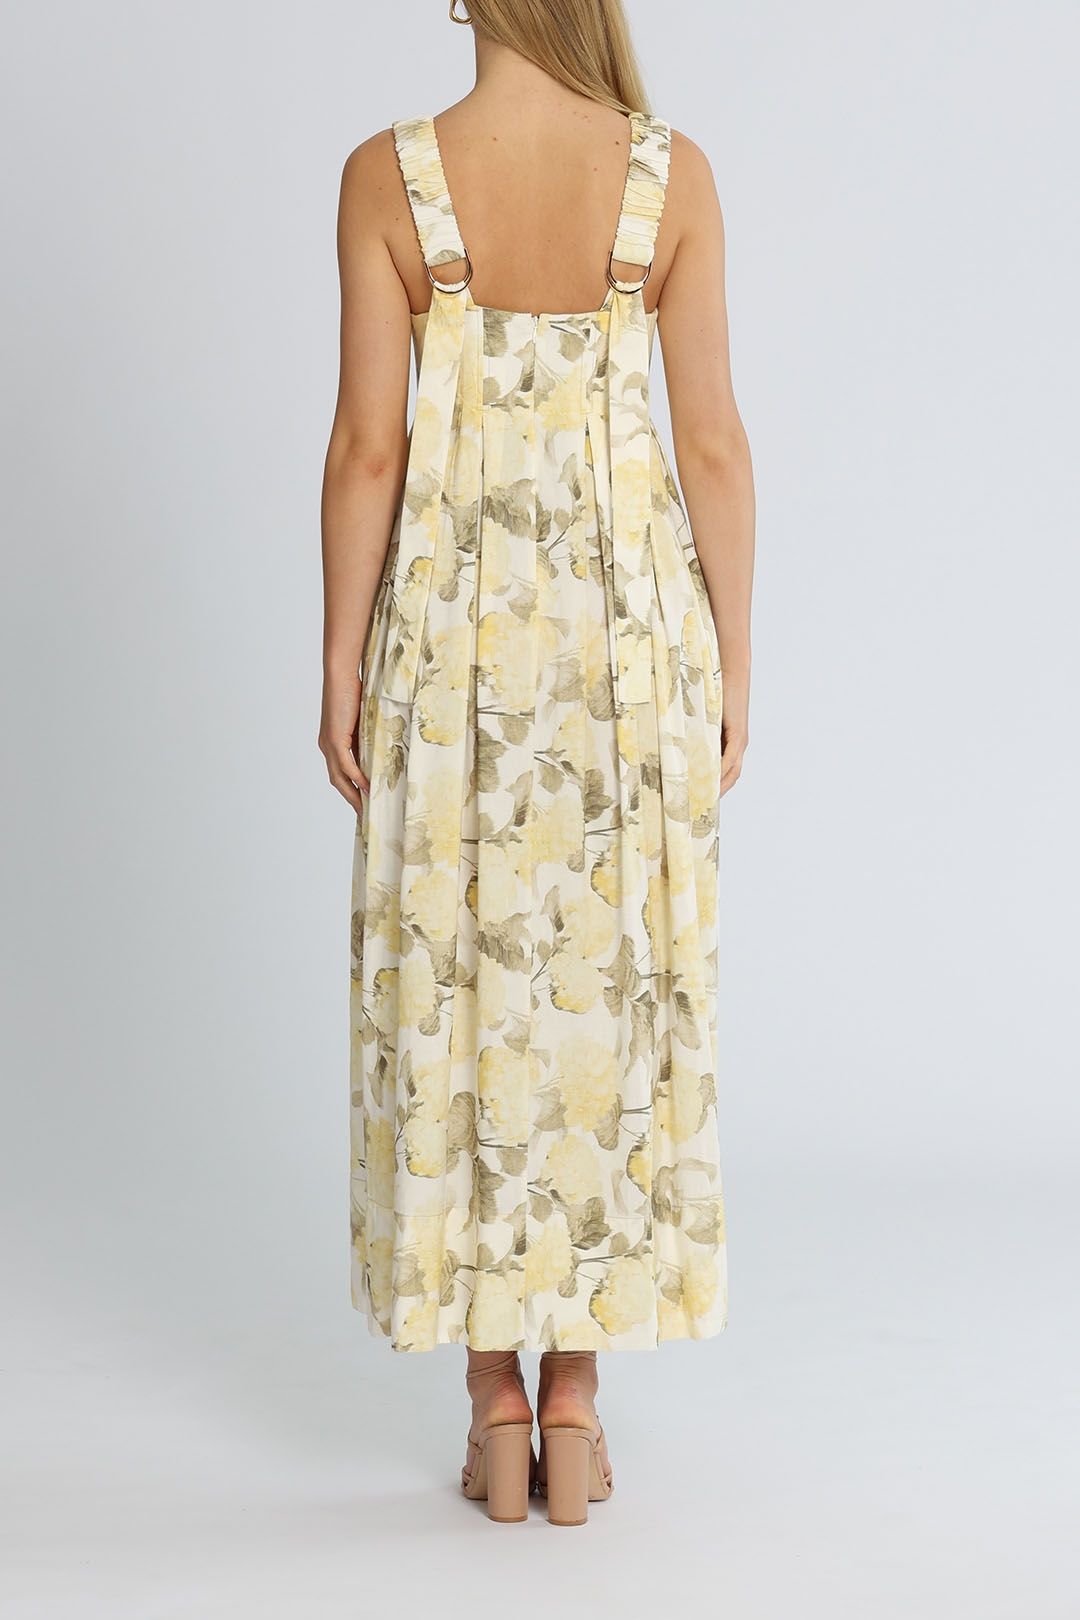 Acler Exeter Dress Floral Midi